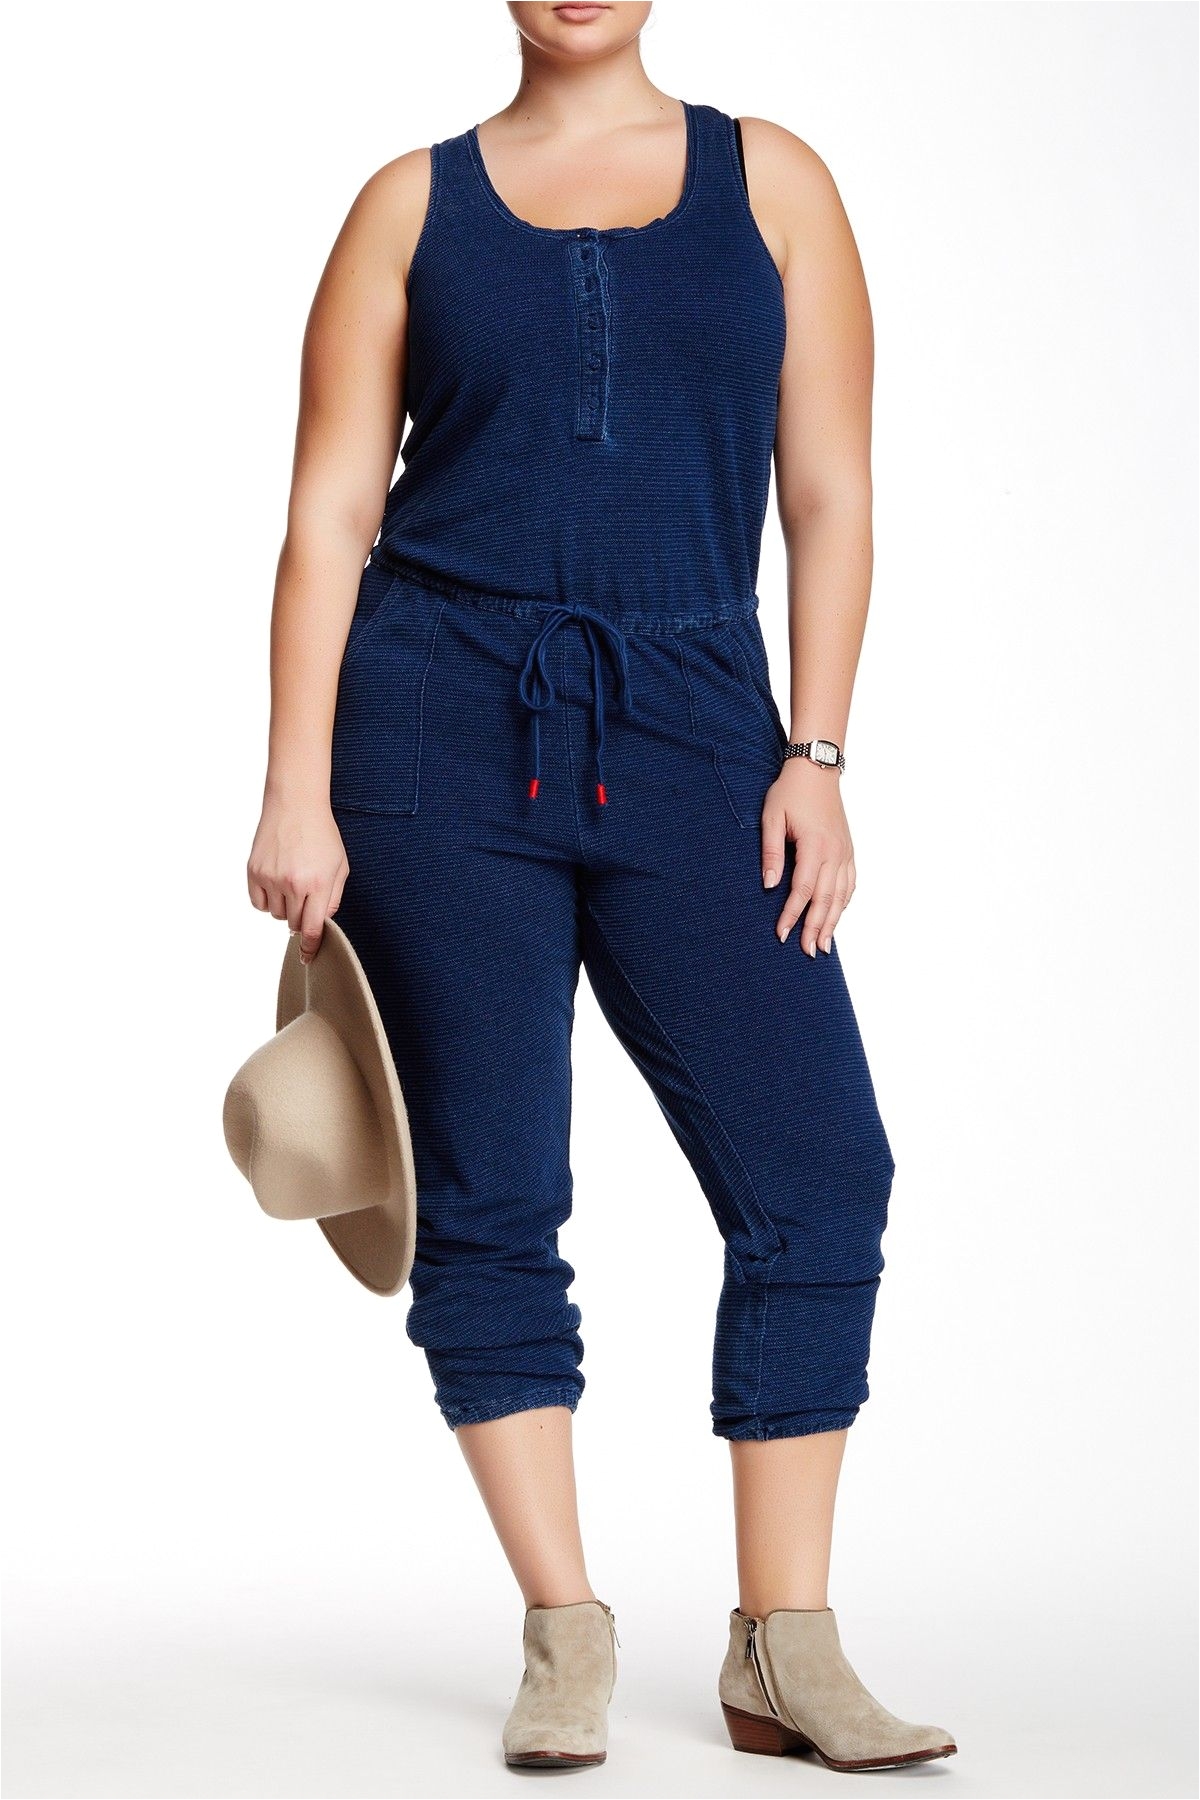 lucky brand indigo jumpsuit plus size save 55 today deal tracking app